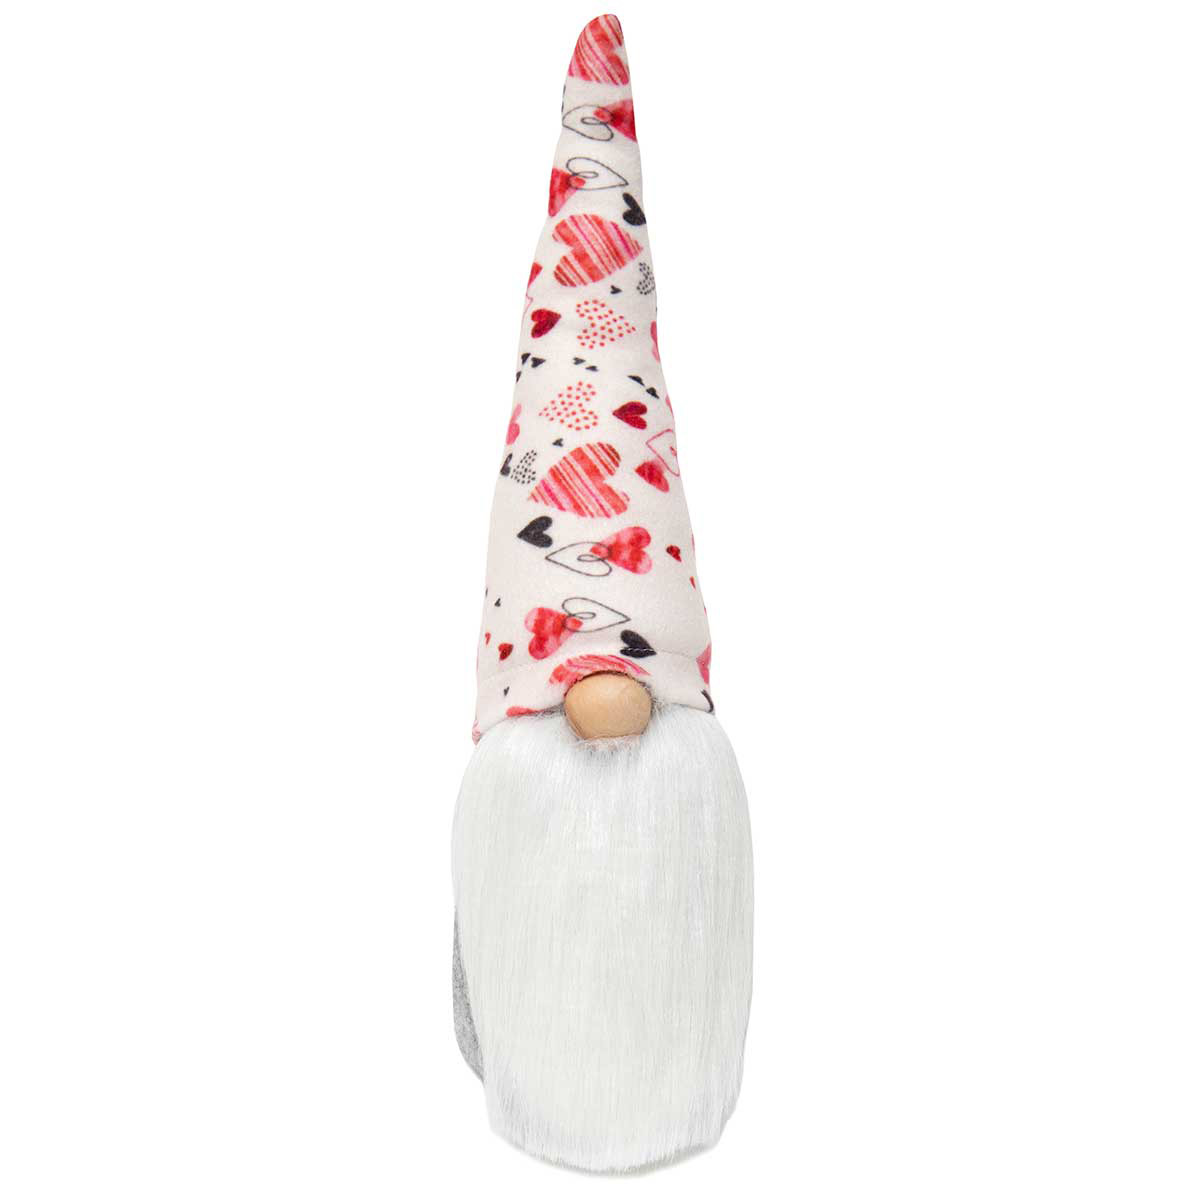 !Sir Heartsalot Gnome with Wood Nose 13.5"